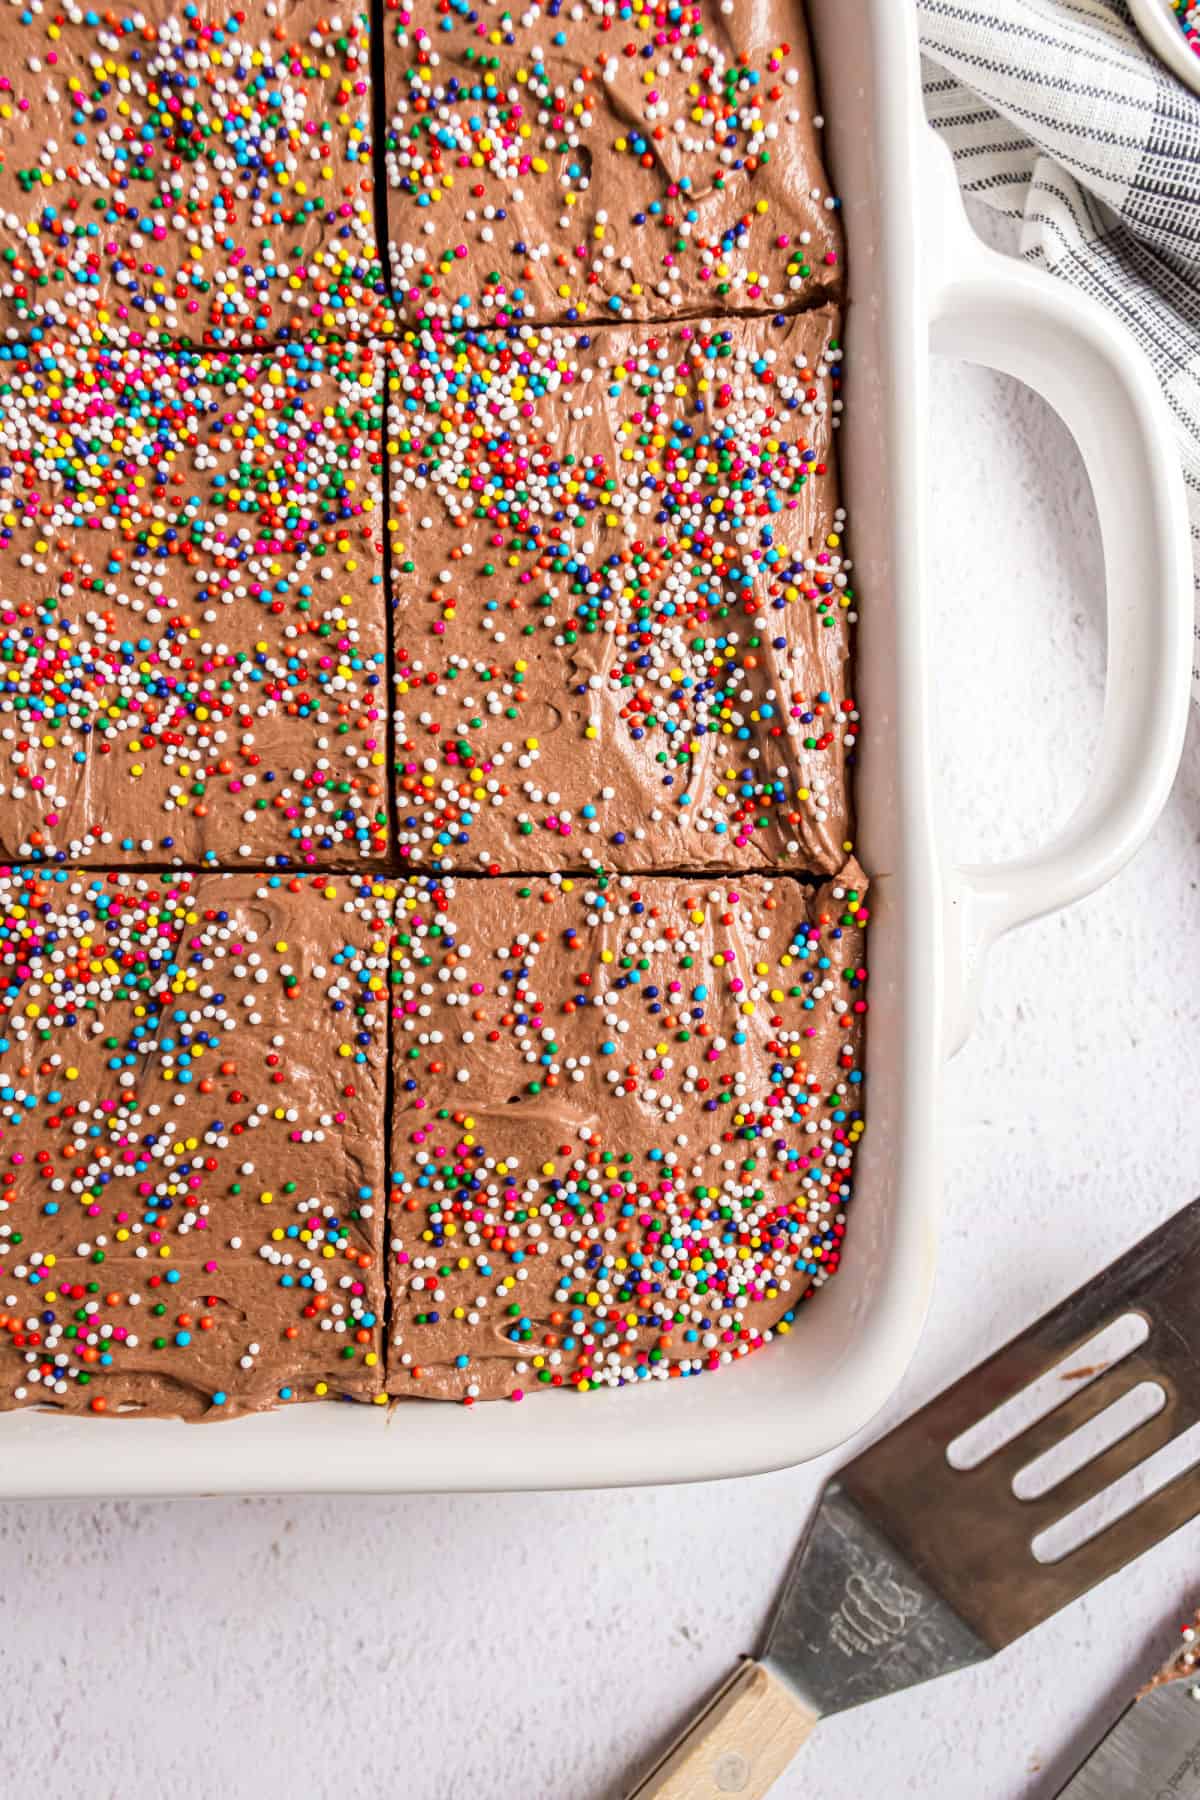 Chocolate cake in a white 13x9 baking dish topped with frosting and sprinkles.